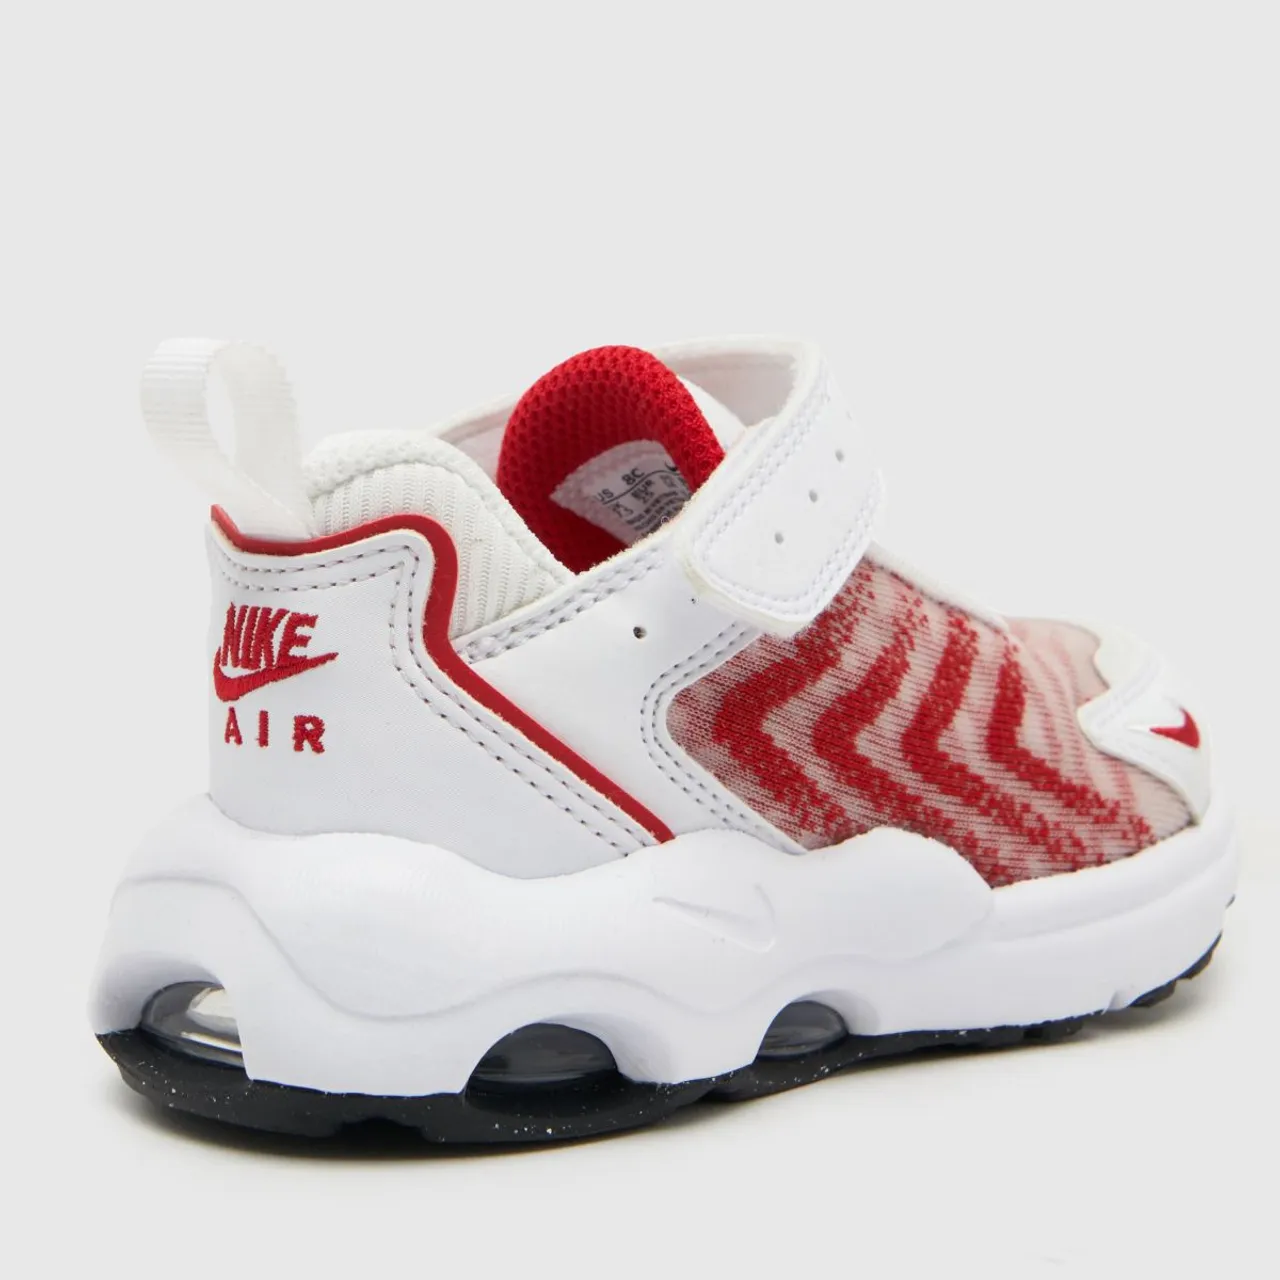 Nike White & Red Air Max Tw Girls Toddler Trainers